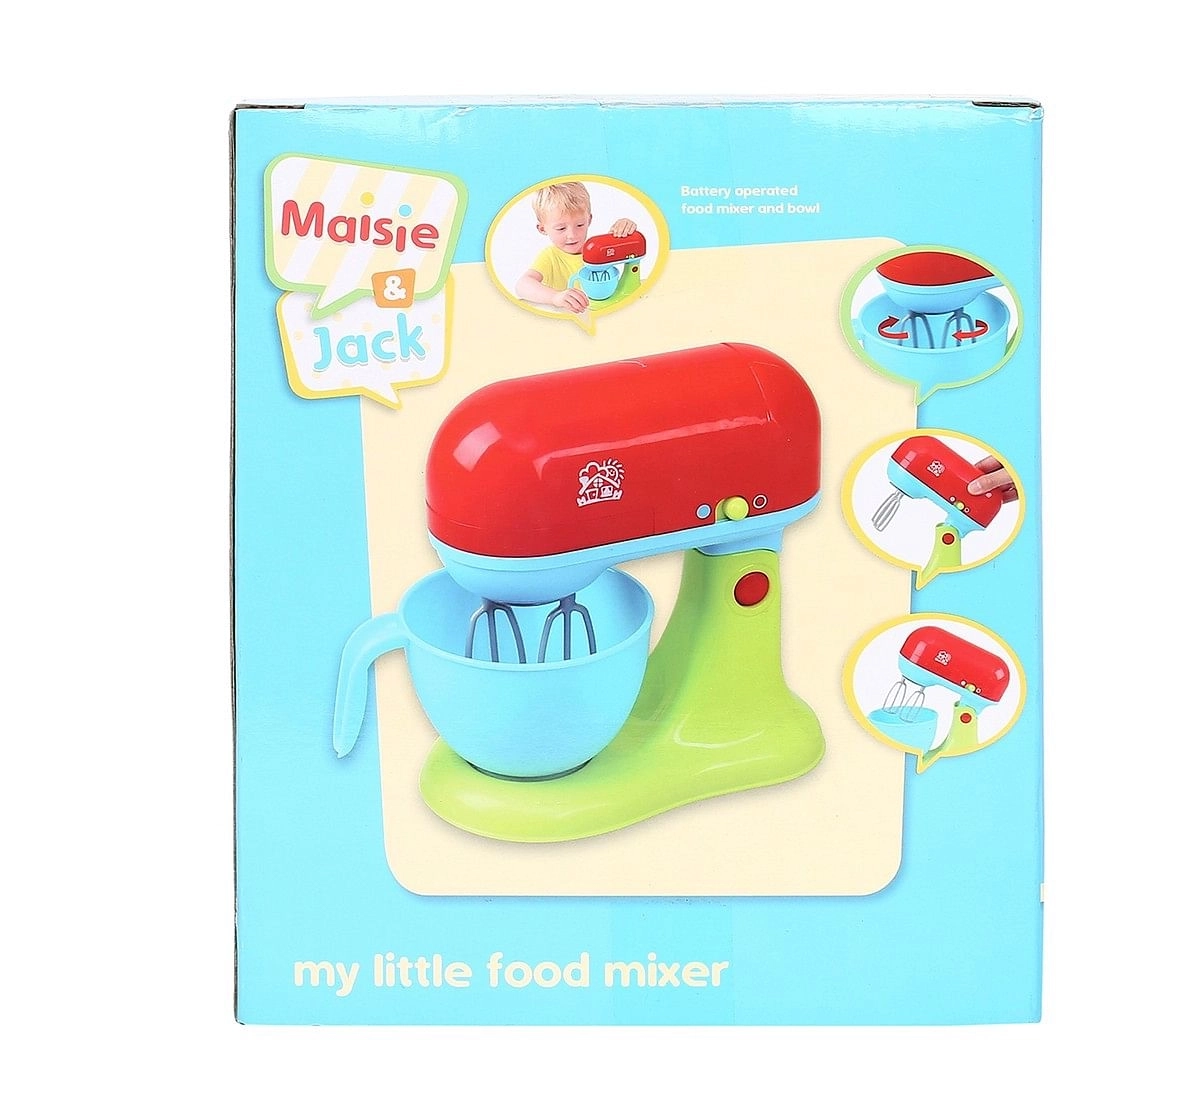  Hamleys Play Time Food Mixer Toy Kitchen Sets & Appliances for age 3Y+ 